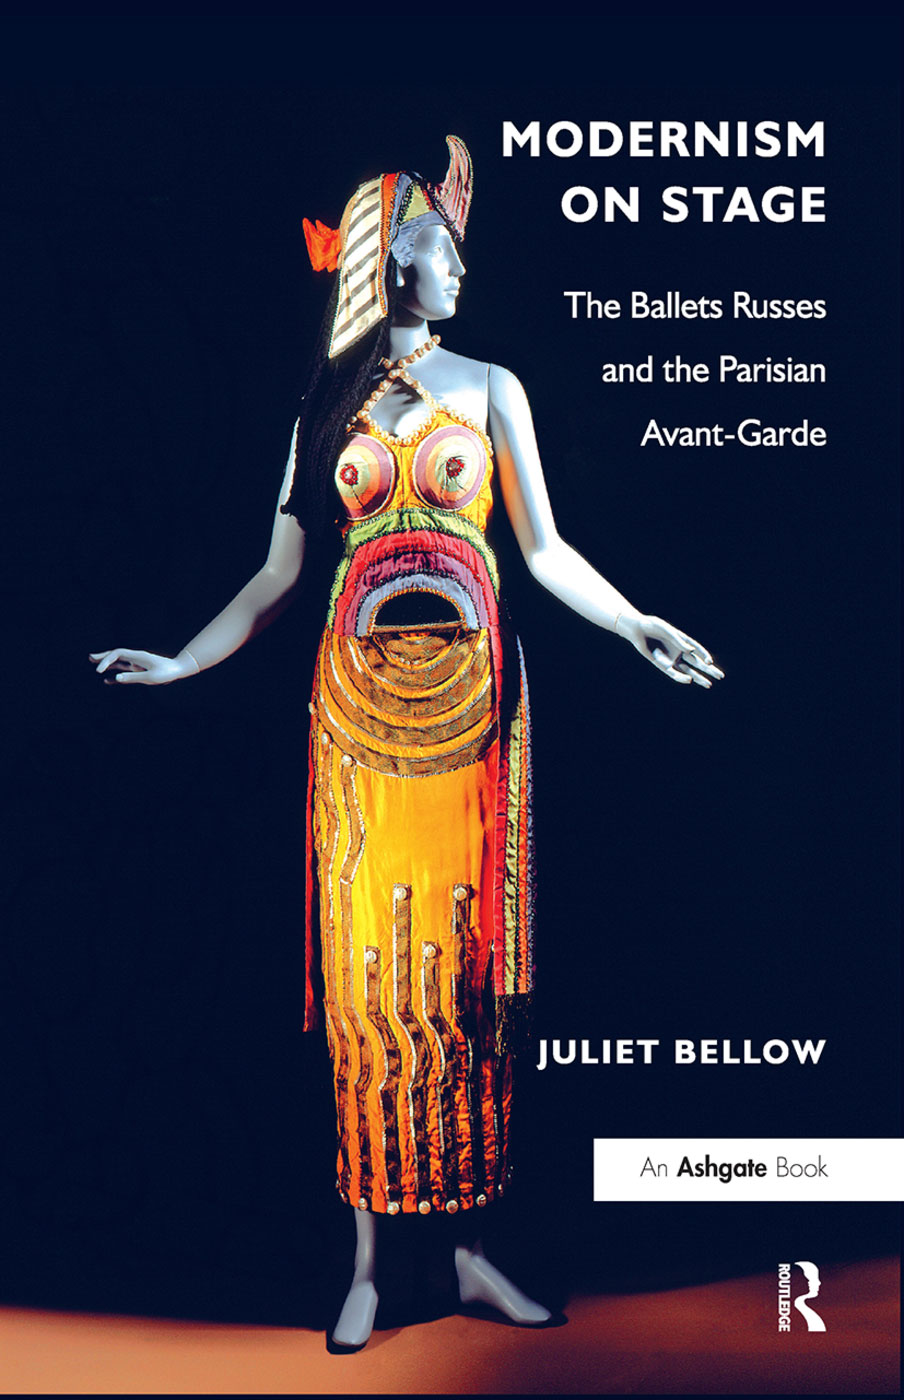 Cover image of Modernism on Stage: The Ballets Russes and the Parisian Avant-Garde by Juliet Bellow